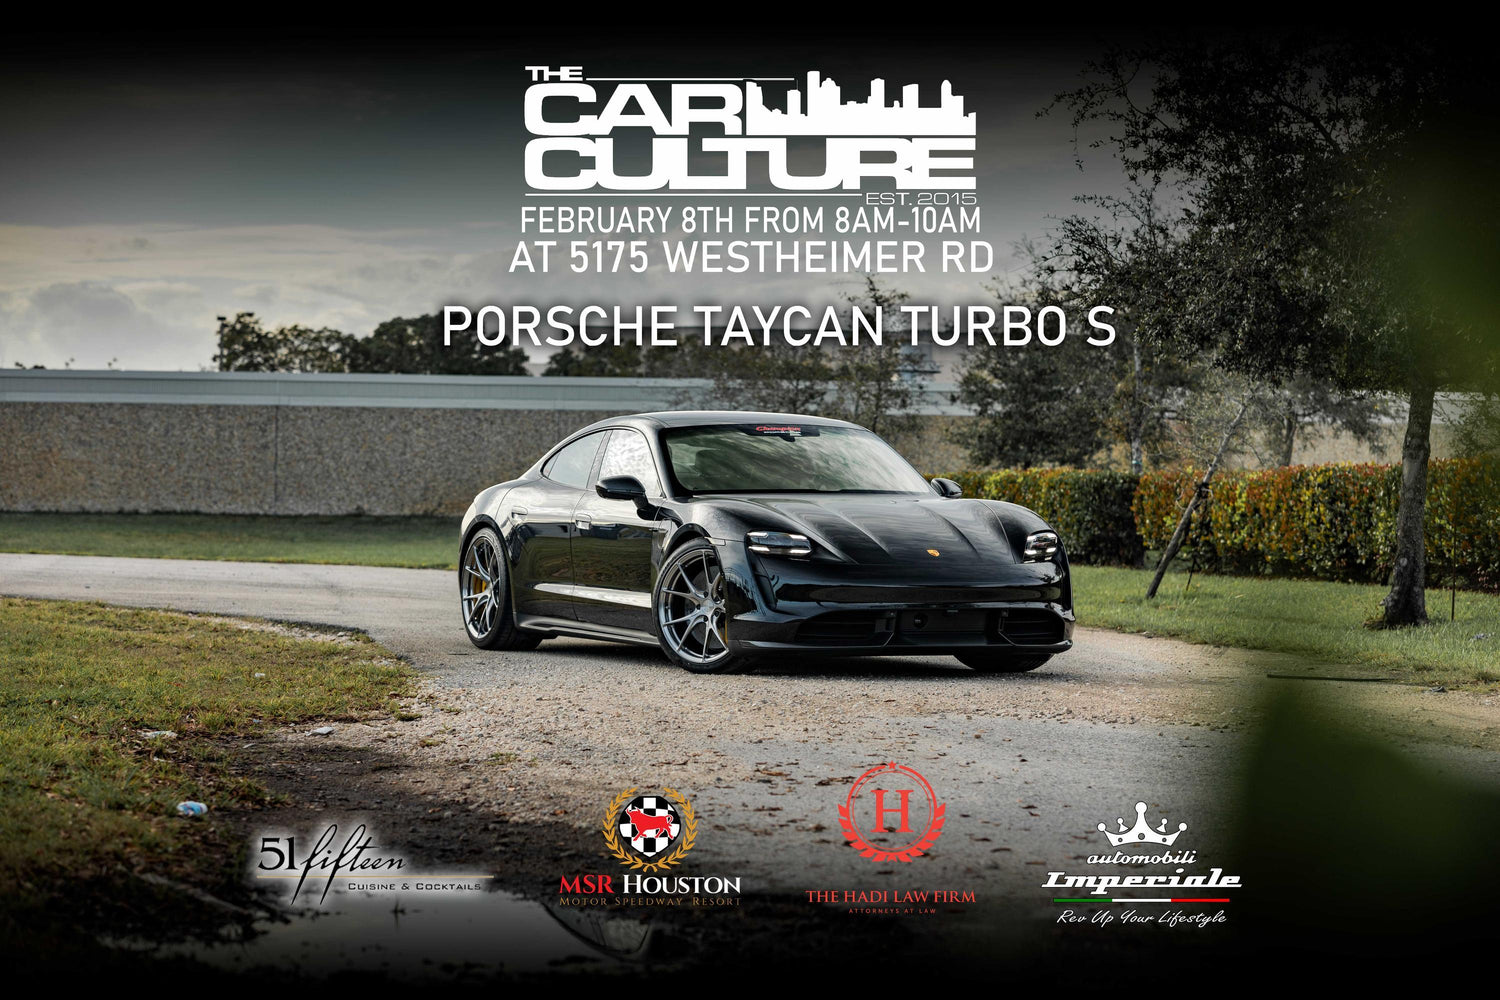 Porsche Taycan Turbo S Confirmed for Supercar Saturday! - The Car Culture